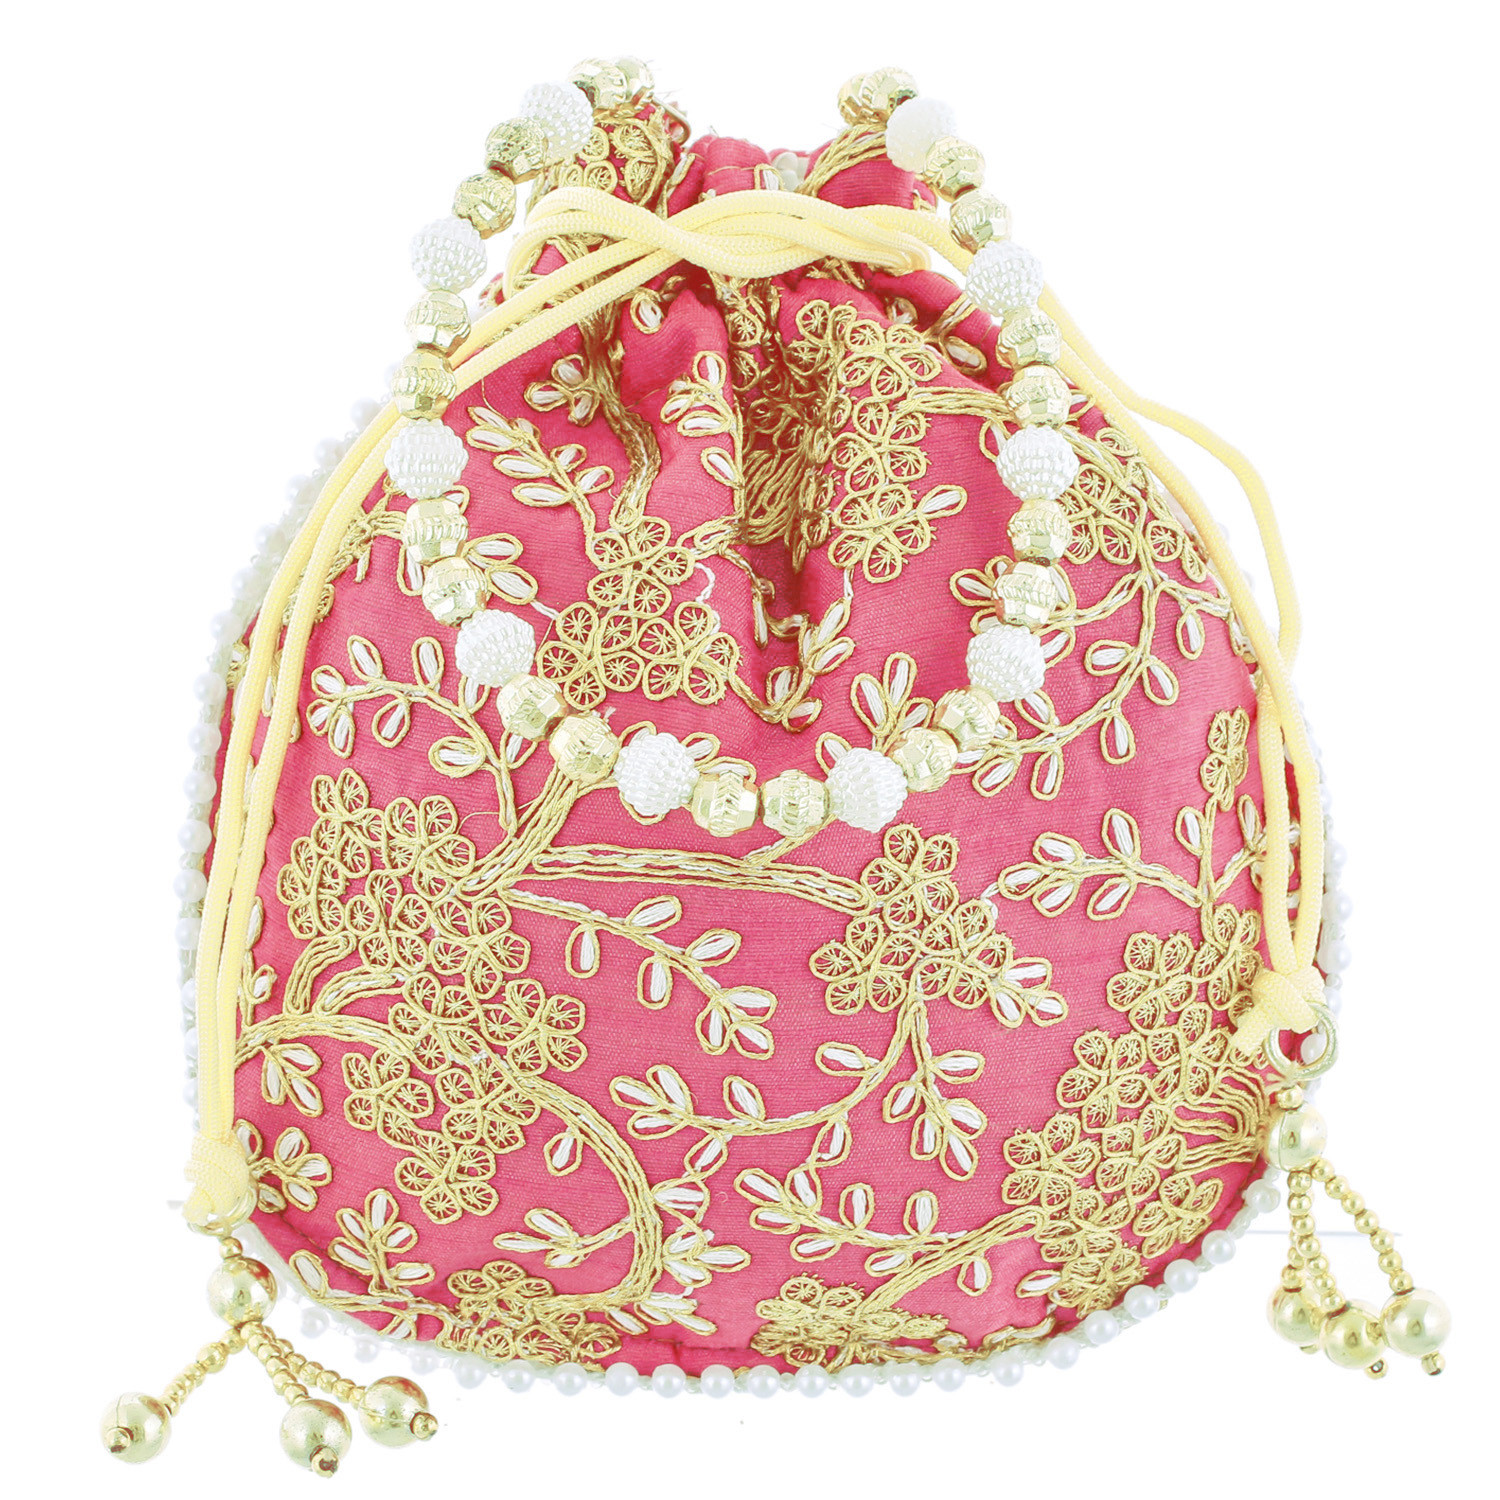 Kuber Industries Embroidery Drawstring Potli|Hand Purse With Gold Pearl Border & Handle For Woman,Girls Pack of 2 (Light Pink & Black)